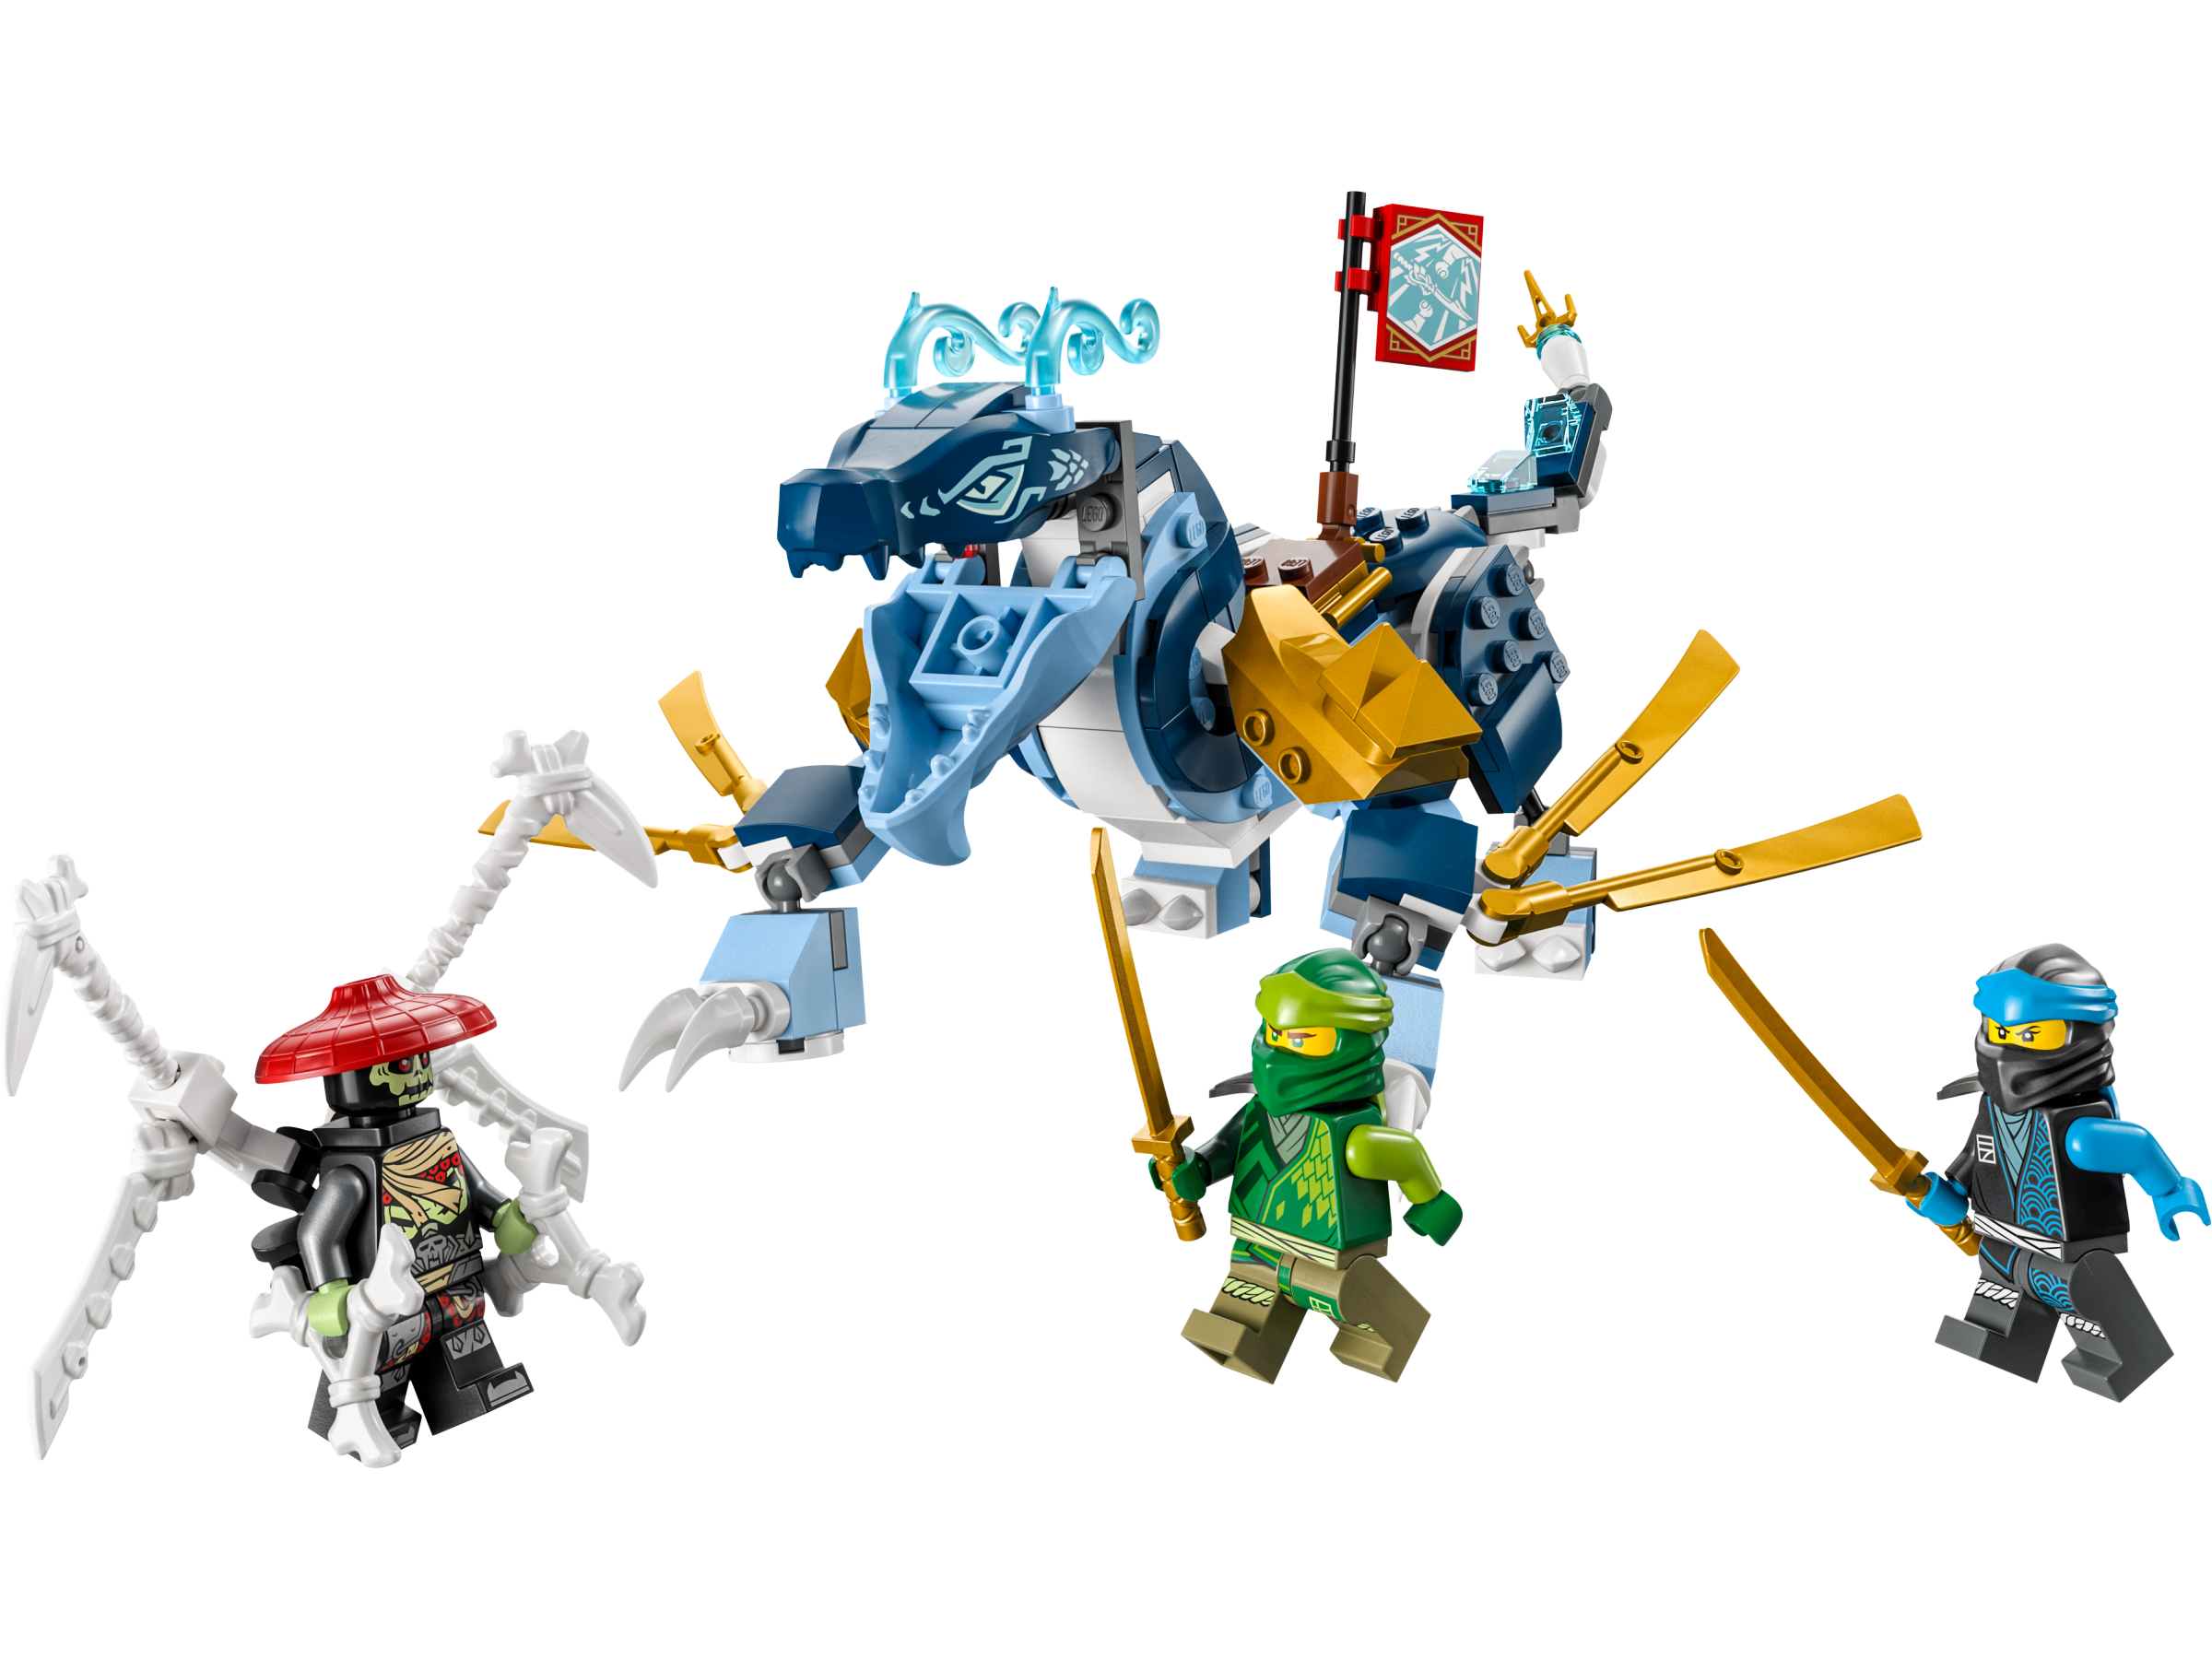 NINJAGO® Toys and Gifts | Official LEGO® Shop US